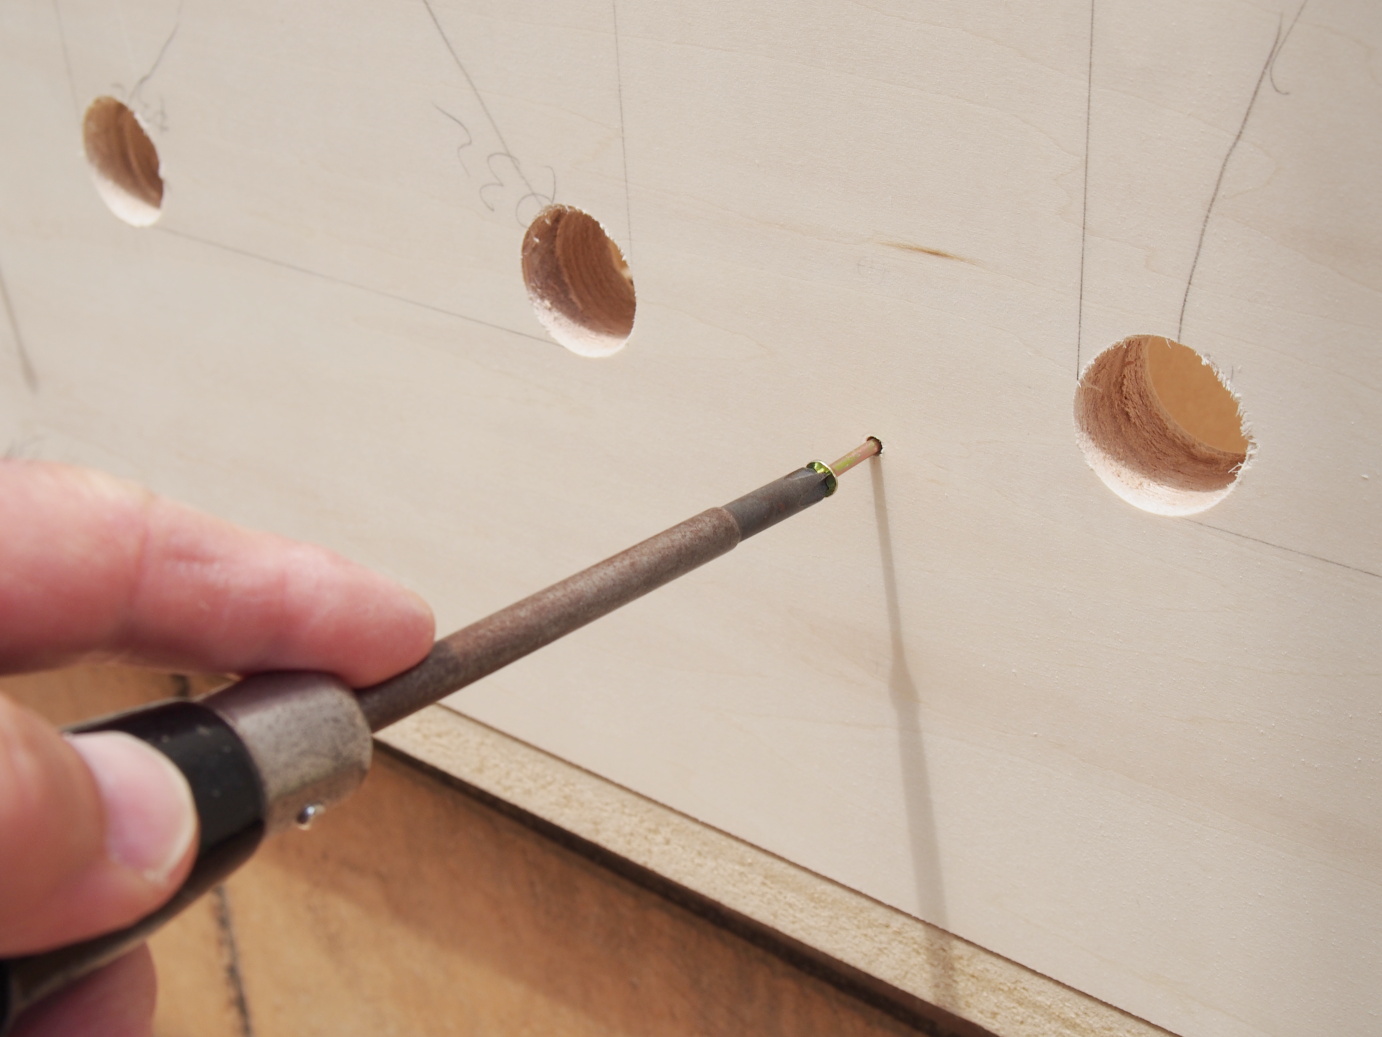 4. Inserting the wood screw with the hand tool